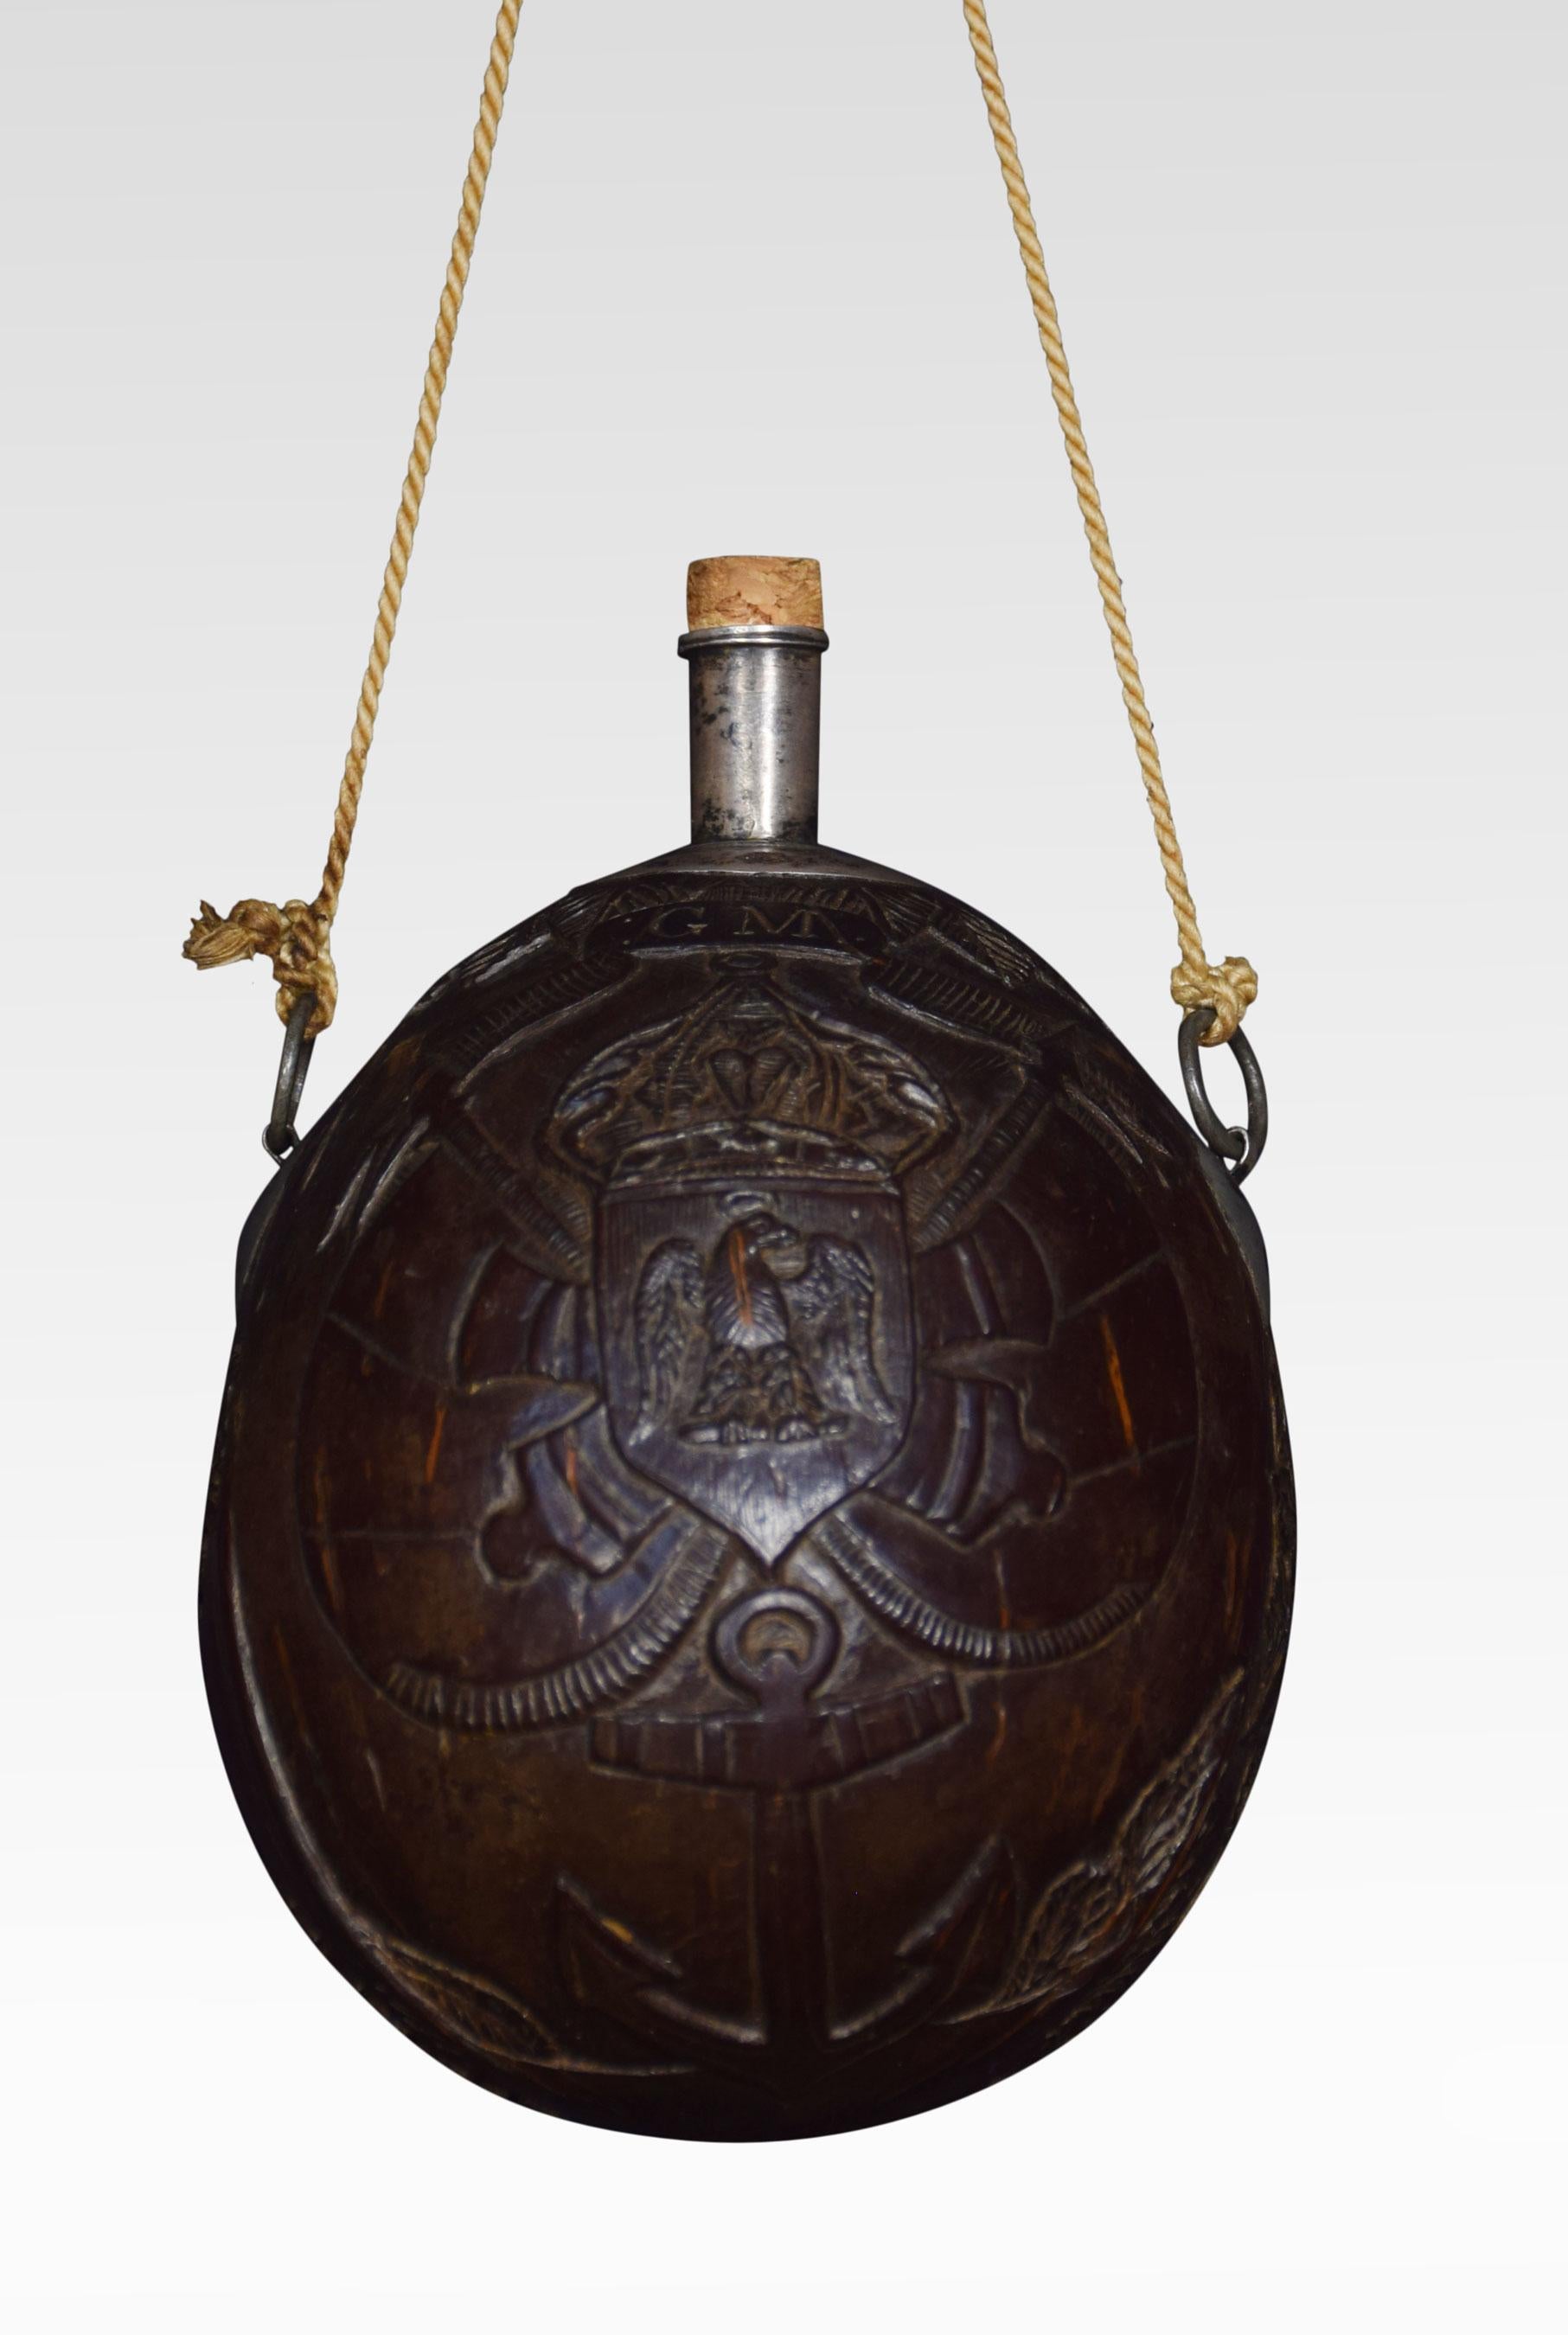 19th century carved bug bear coconut flask, having relief carved all over with portrait of a sailor and naval crest with crossed cannons.
Dimensions
Height 5.5 inches
Width 4 inches
Depth 4 inches.